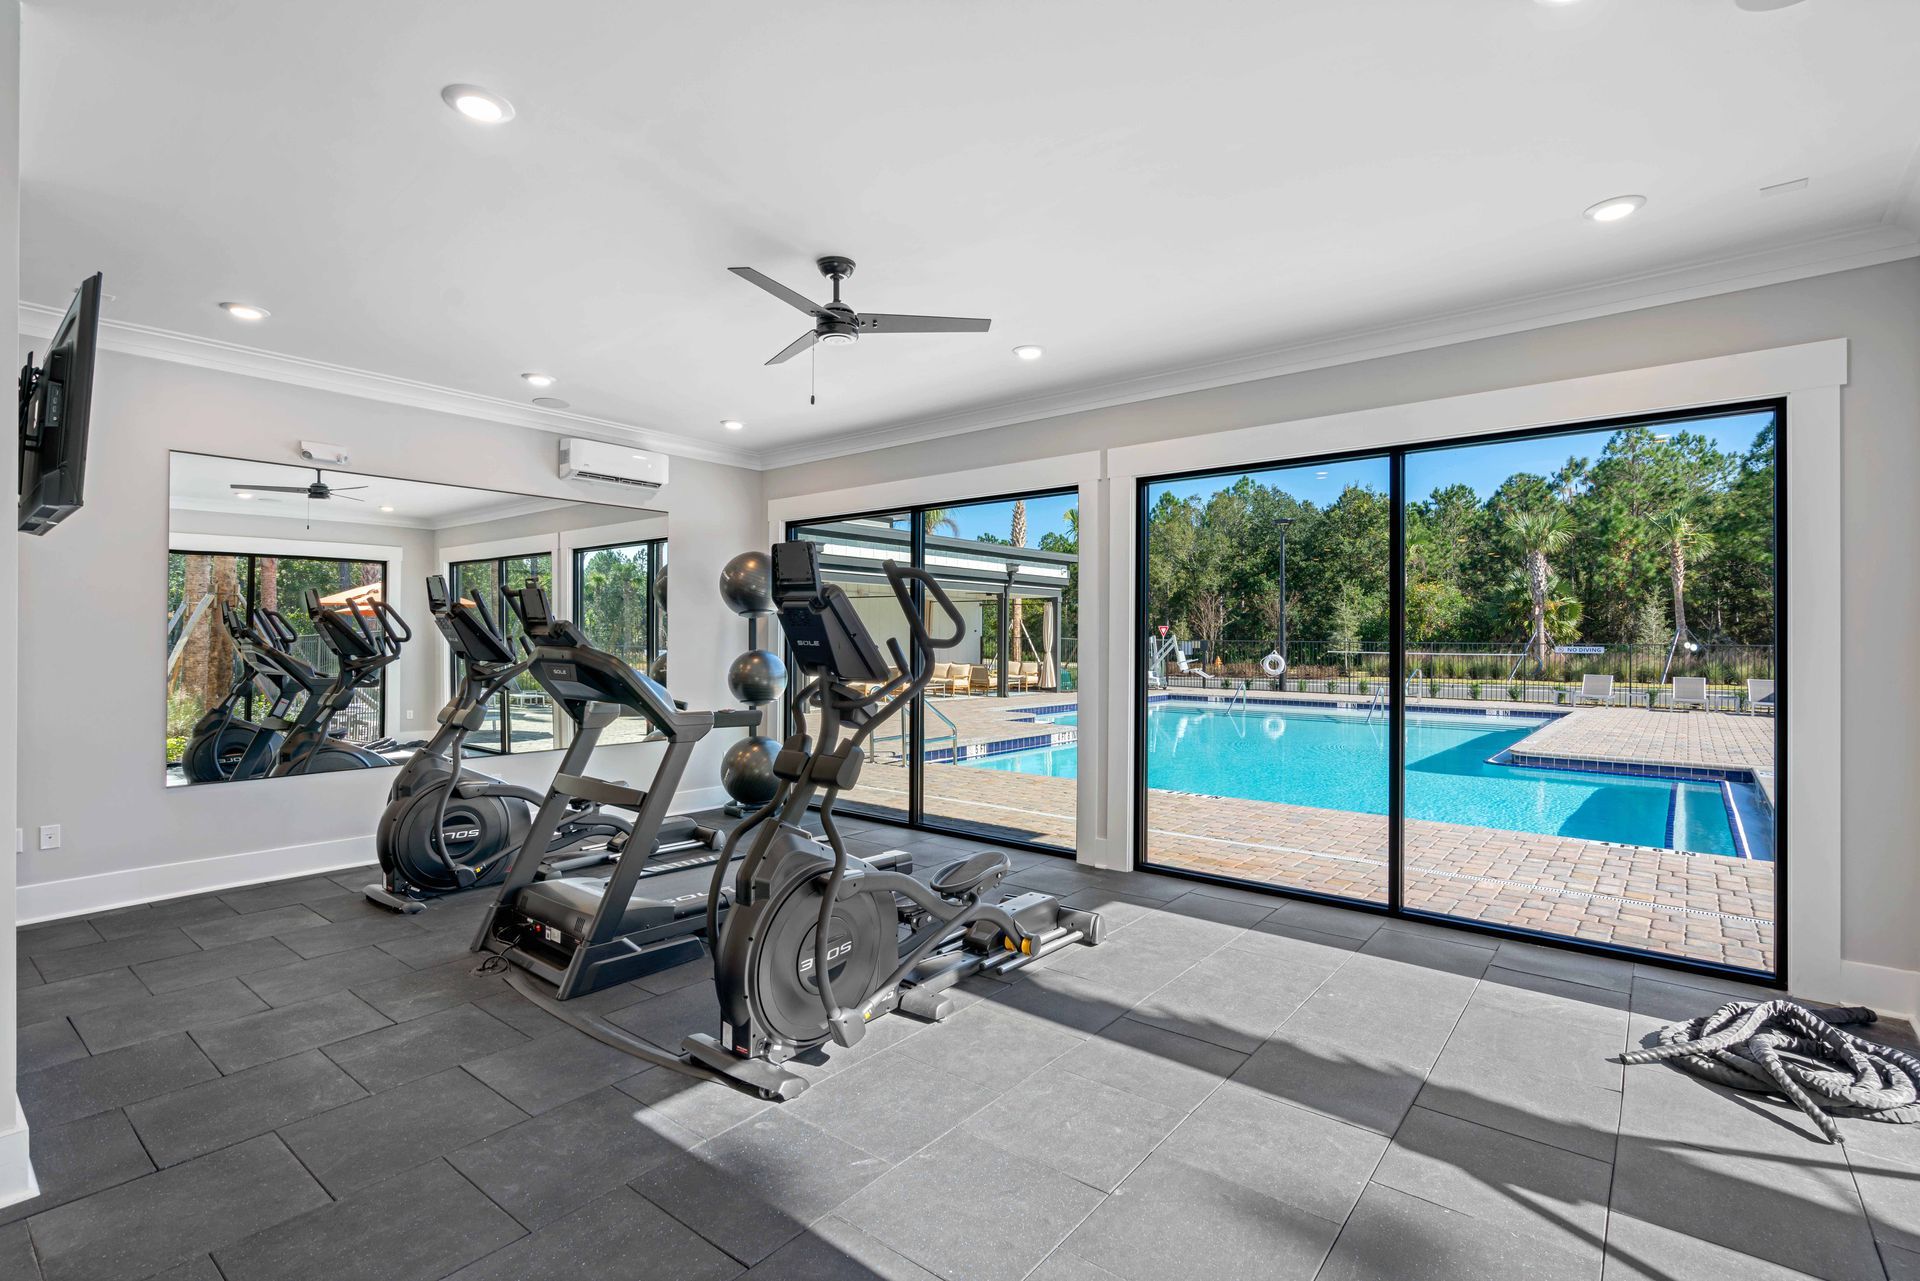 Pointe Grand Palm Coast Apartments 24-hour Fitness Center in Palm Coast, FL